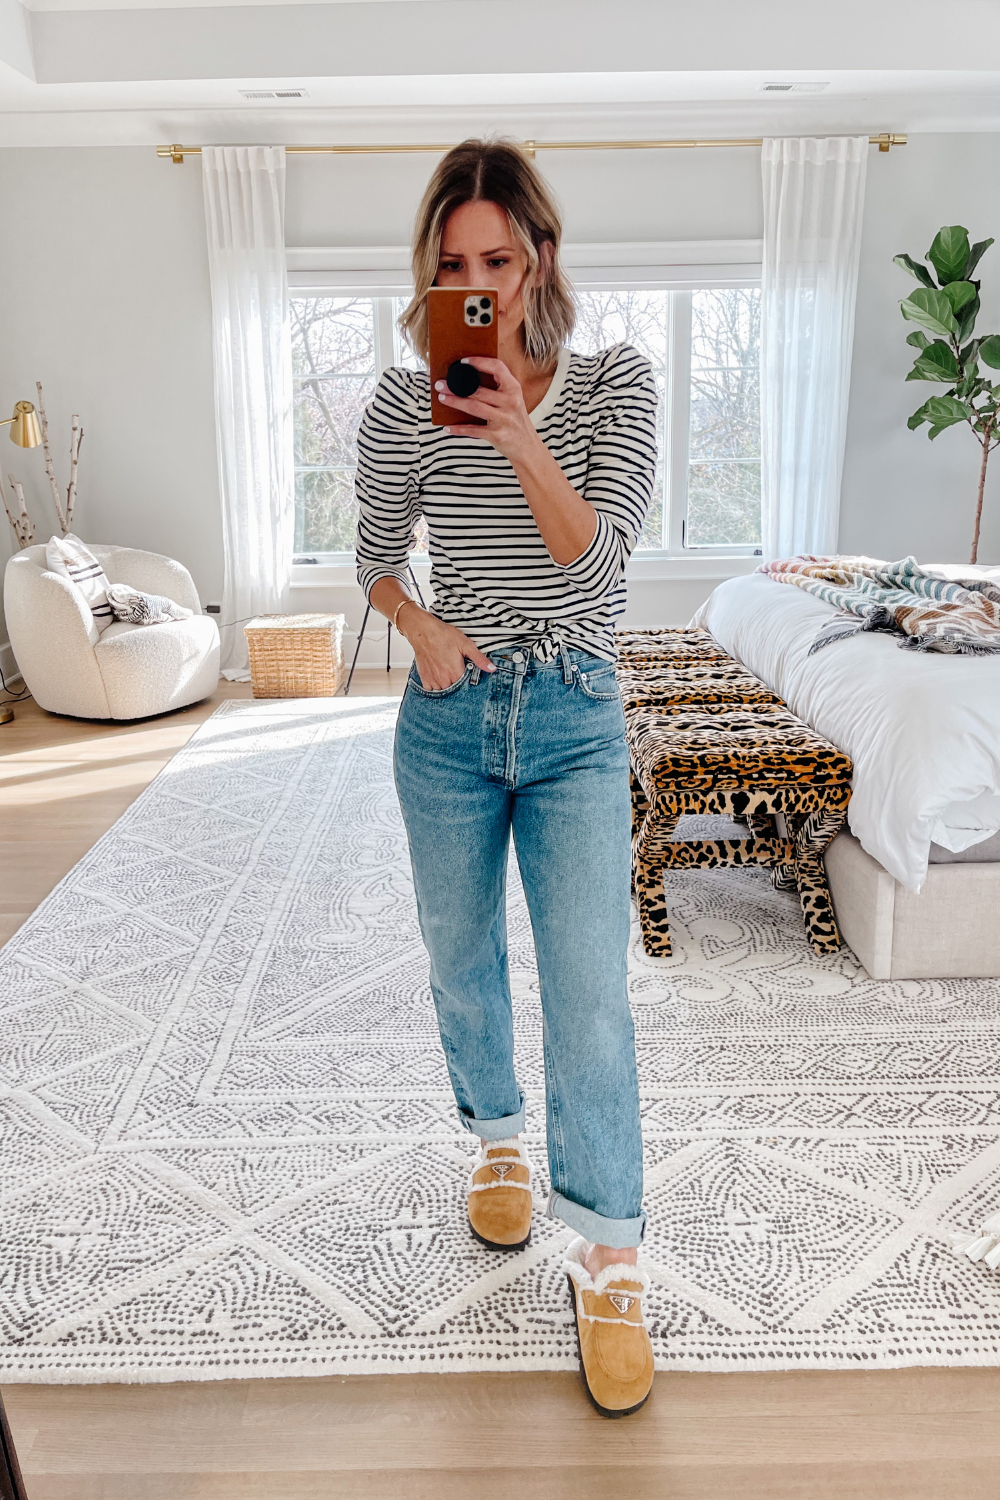 Suzanne wearing a striped puff sleeve top and denim jeans